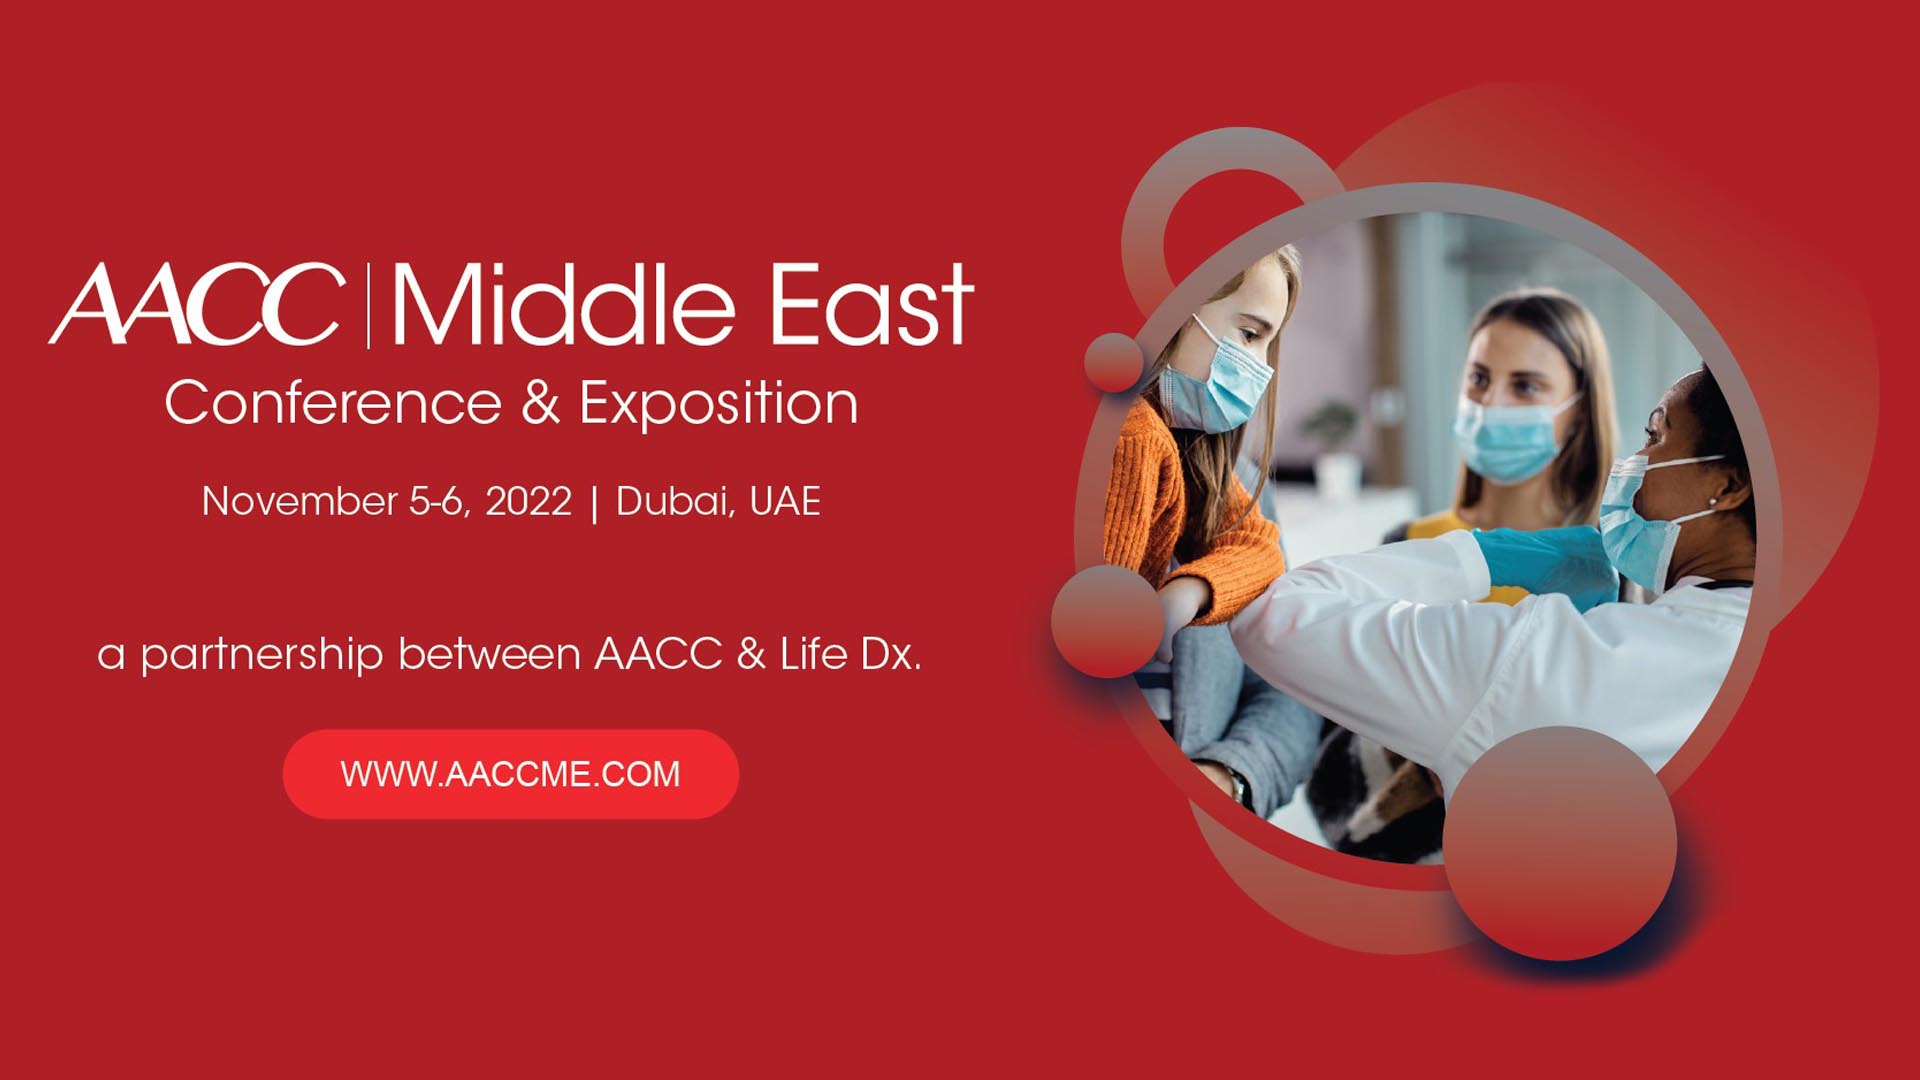 Life Diagnostics is pleased to announce the 2022 AACC Middle East